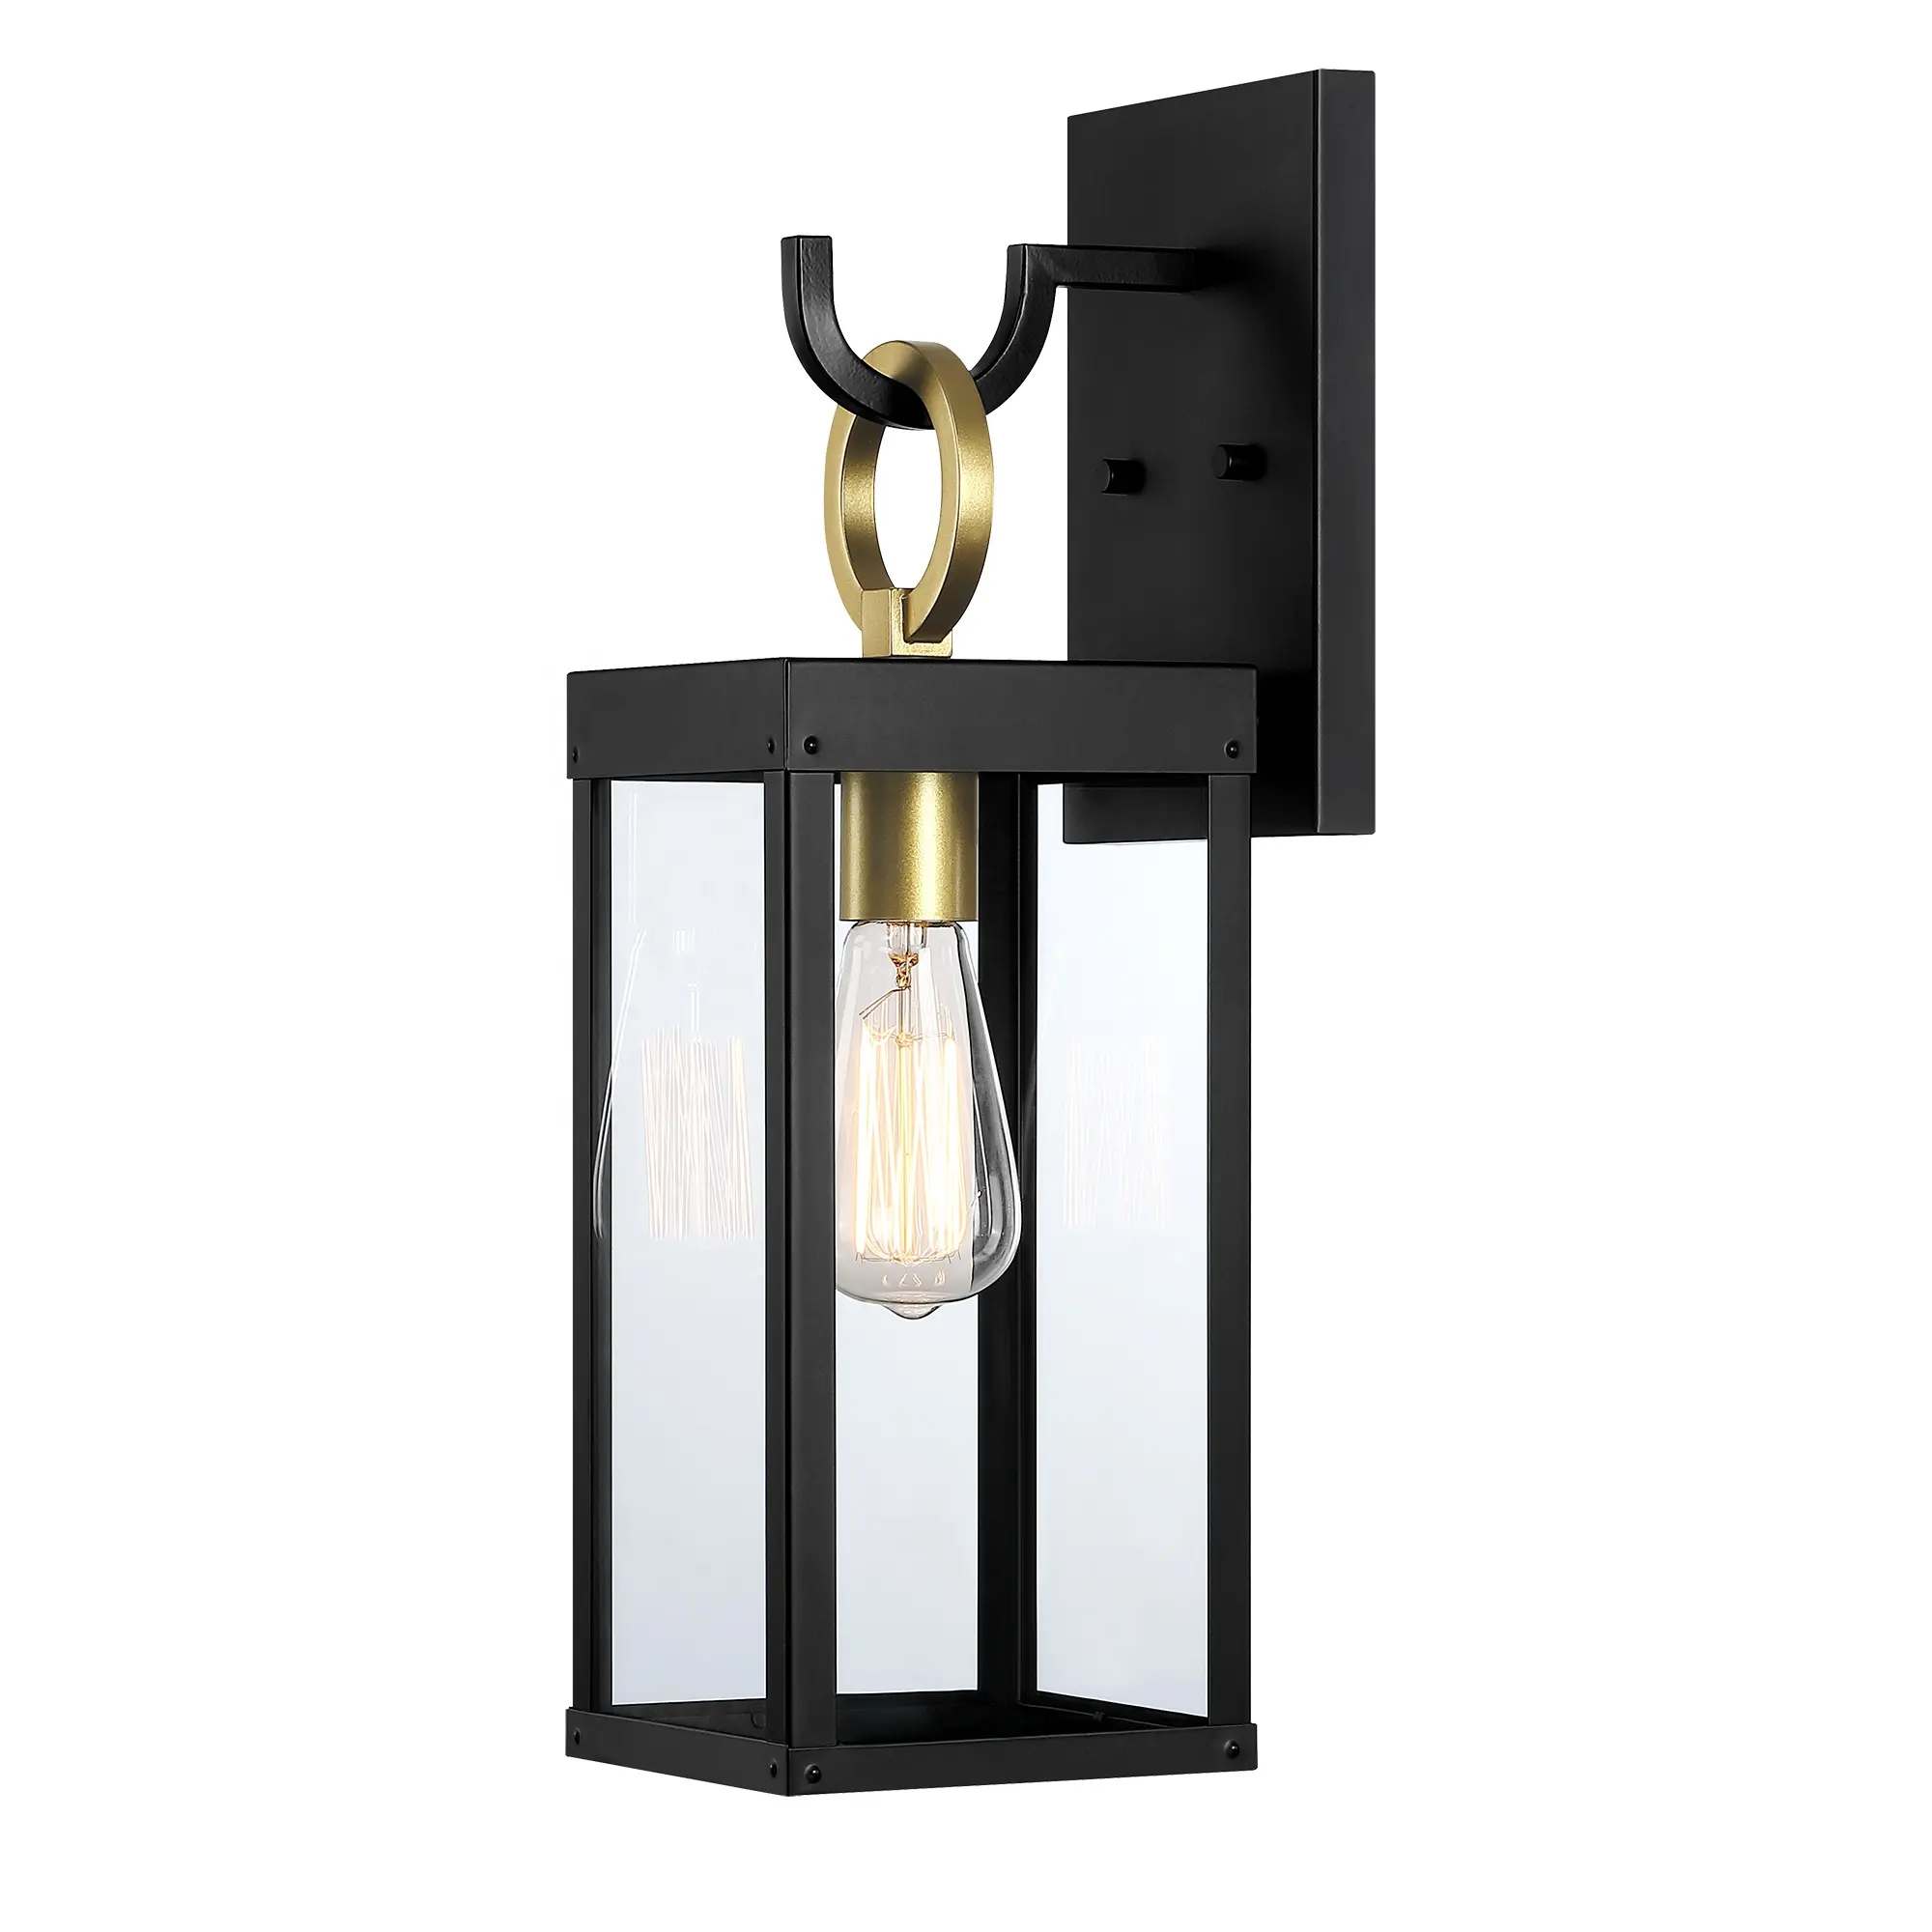 Wall light outdoor clear glass Waterproof Wall Lights black Indoor lantern glass wall light indoor farmhouse and home